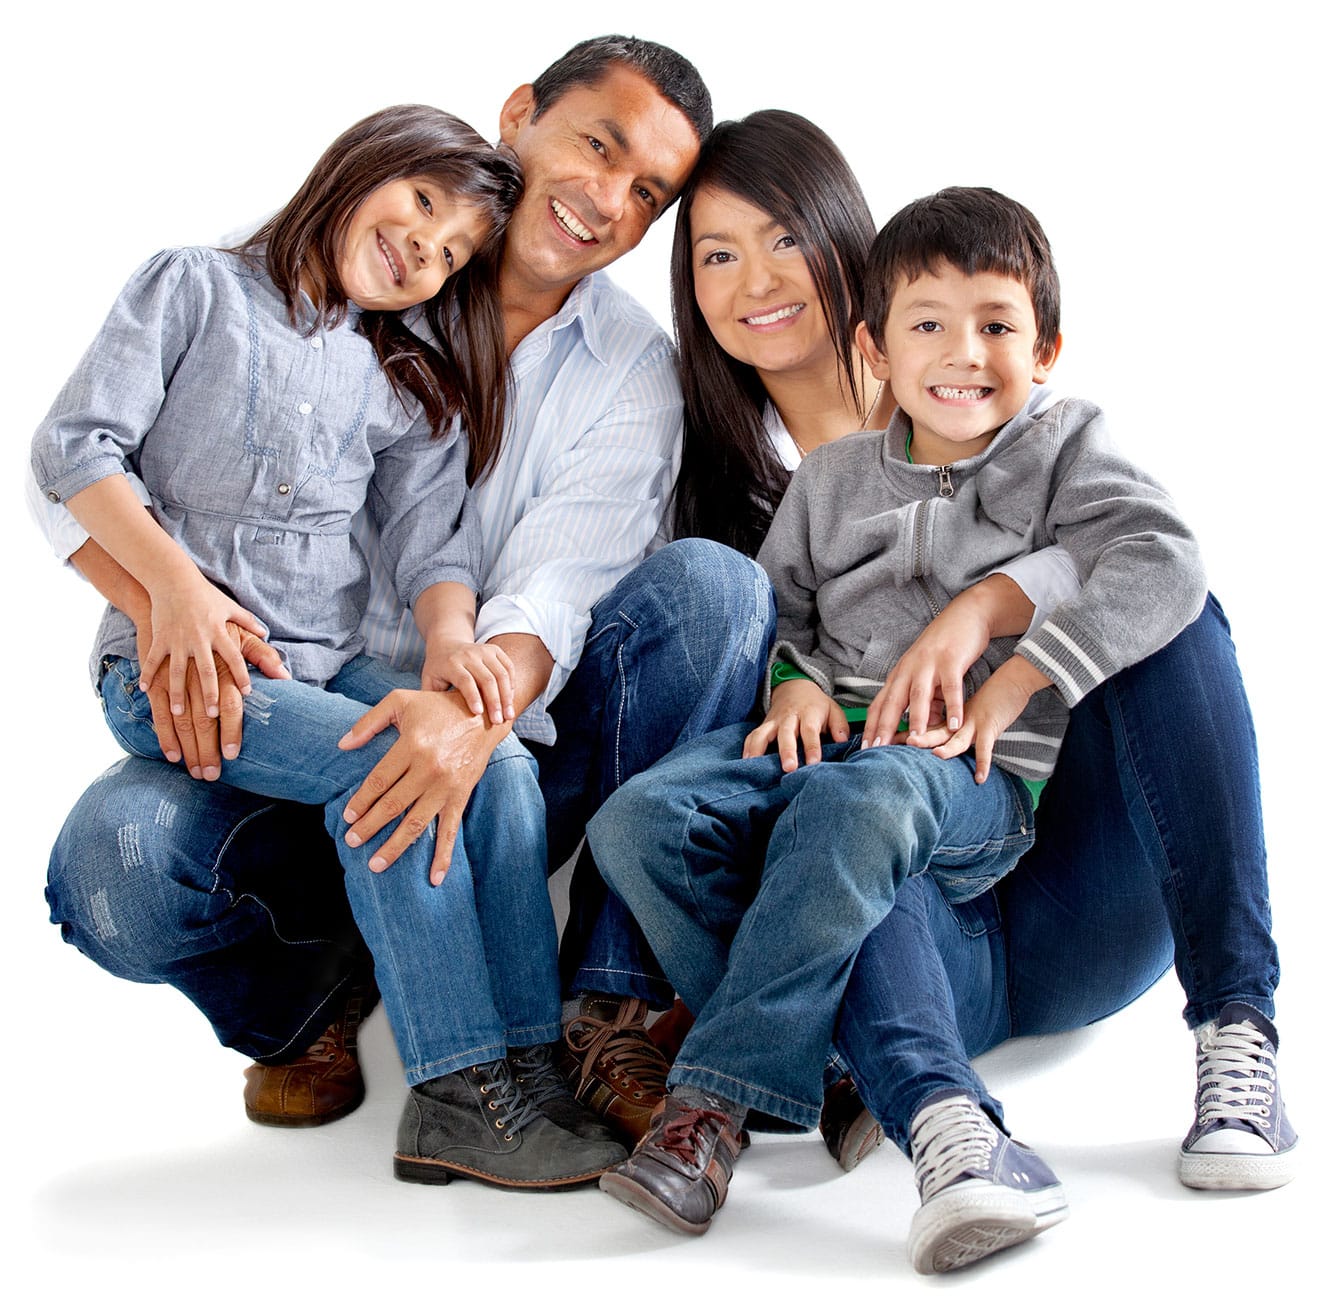 A smiling Canada Family Class visa family of four, sitting closely together on a white background.